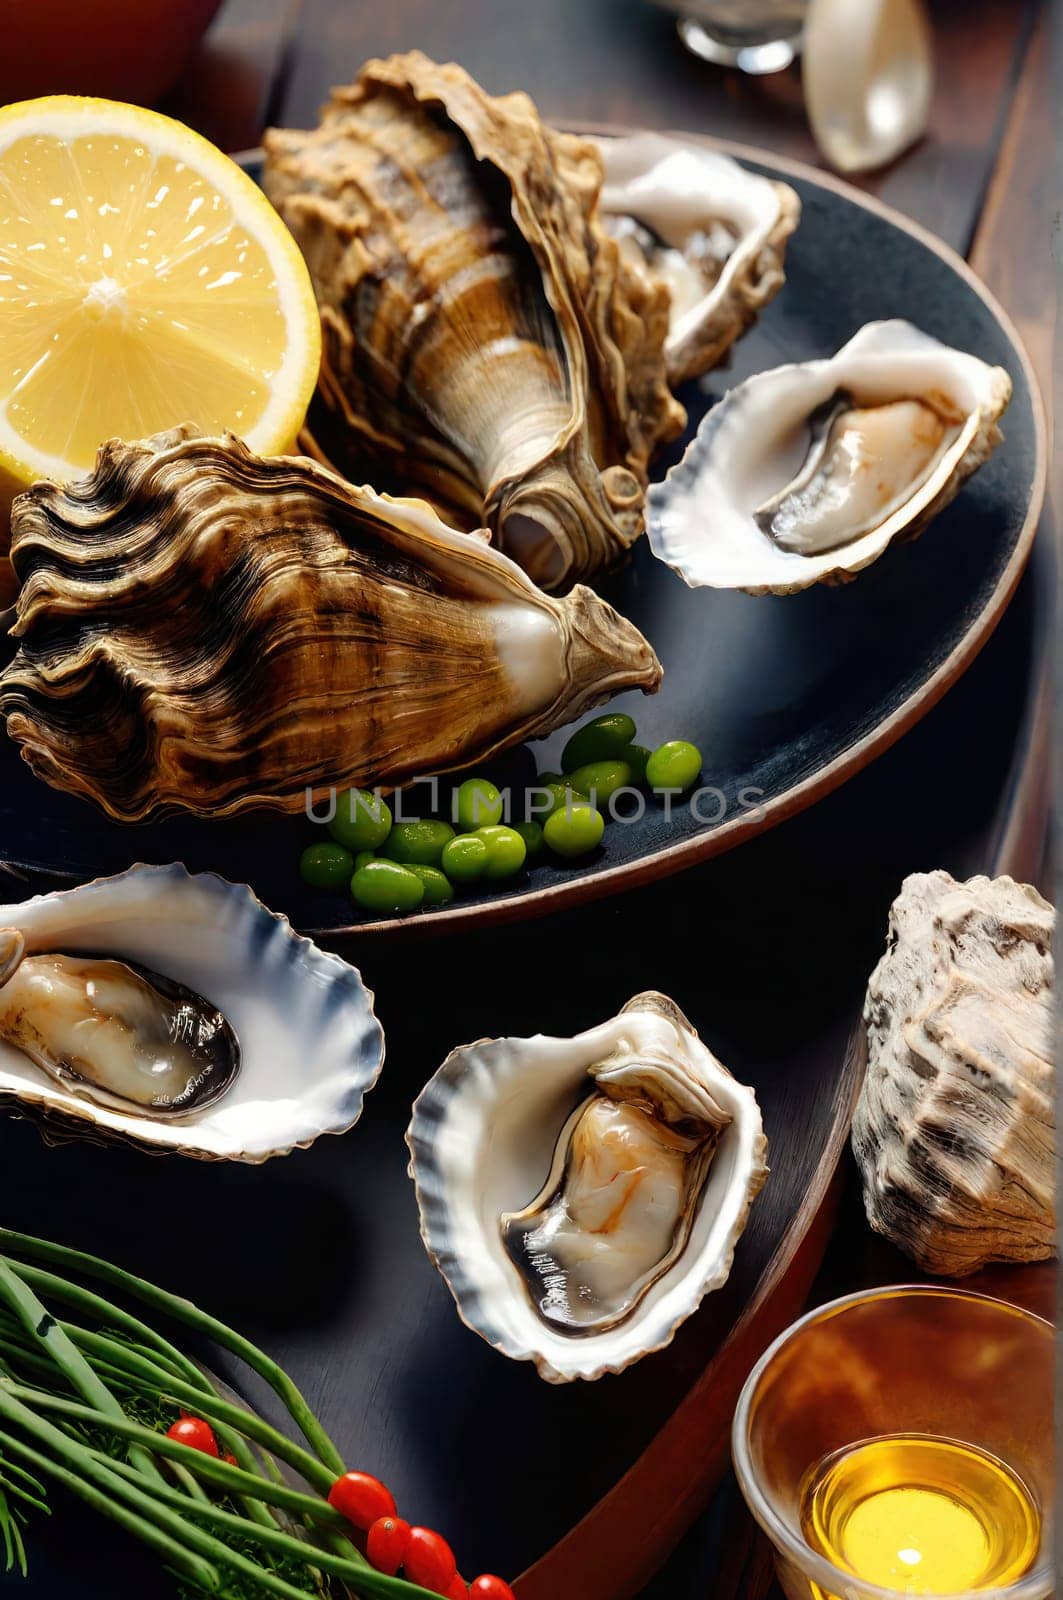 Plate of oysters ready to celebrate National oyster day. Wallpaper. Vertical photo for national oyster day promotions.